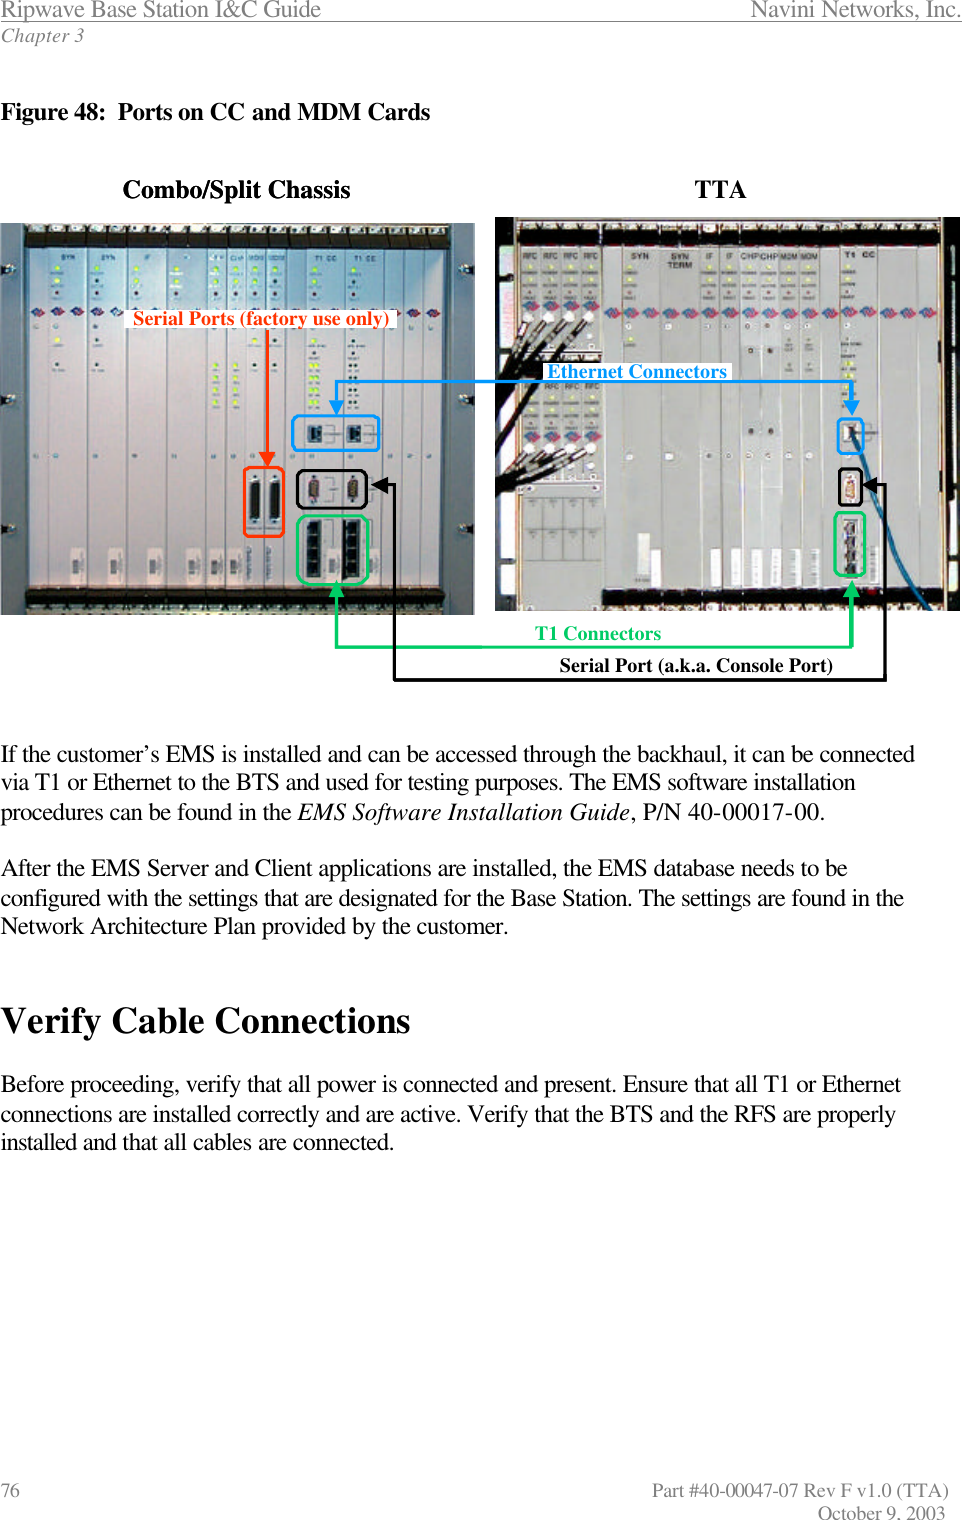 Ripwave Base Station I&amp;C Guide                 Navini Networks, Inc. Chapter 3 76                   Part #40-00047-07 Rev F v1.0 (TTA)         October 9, 2003  Figure 48:  Ports on CC and MDM Cards    If the customer’s EMS is installed and can be accessed through the backhaul, it can be connected via T1 or Ethernet to the BTS and used for testing purposes. The EMS software installation procedures can be found in the EMS Software Installation Guide, P/N 40-00017-00.  After the EMS Server and Client applications are installed, the EMS database needs to be configured with the settings that are designated for the Base Station. The settings are found in the Network Architecture Plan provided by the customer.    Verify Cable Connections  Before proceeding, verify that all power is connected and present. Ensure that all T1 or Ethernet connections are installed correctly and are active. Verify that the BTS and the RFS are properly installed and that all cables are connected.  Combo/Split Chassis TTASerial Port (a.k.a. Console Port)T1 ConnectorsEthernet ConnectorsSerial Ports (factory use only)Combo/Split Chassis TTASerial Port (a.k.a. Console Port)T1 ConnectorsEthernet ConnectorsEthernet ConnectorsSerial Ports (factory use only)Serial Ports (factory use only)